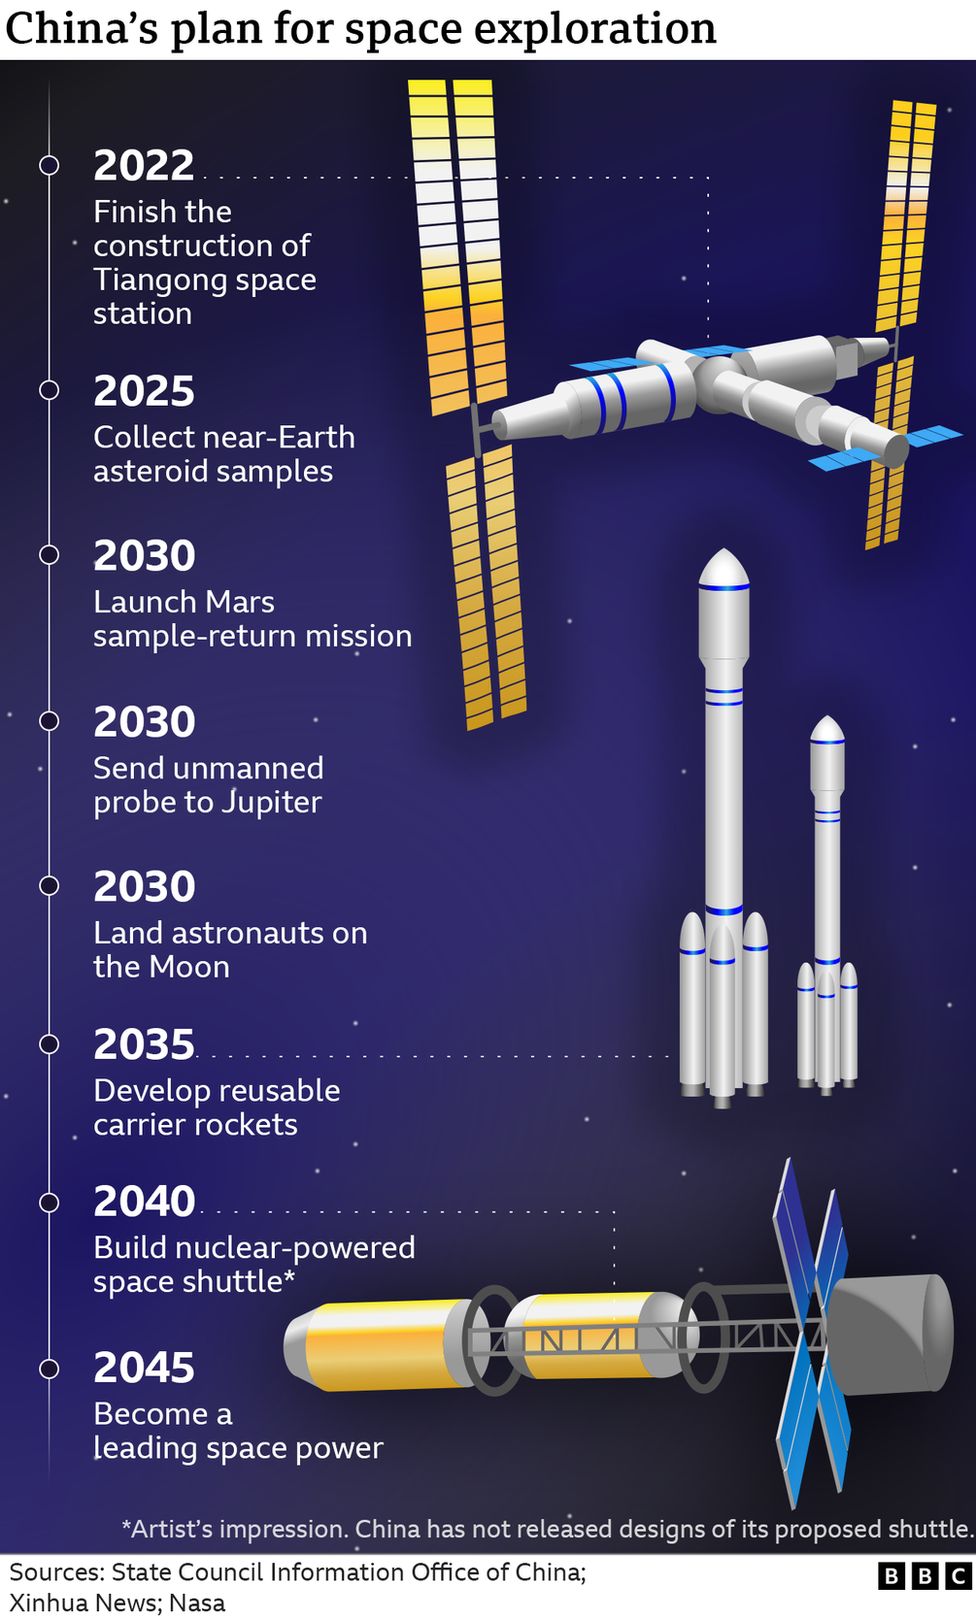 Timeline of China's space plan